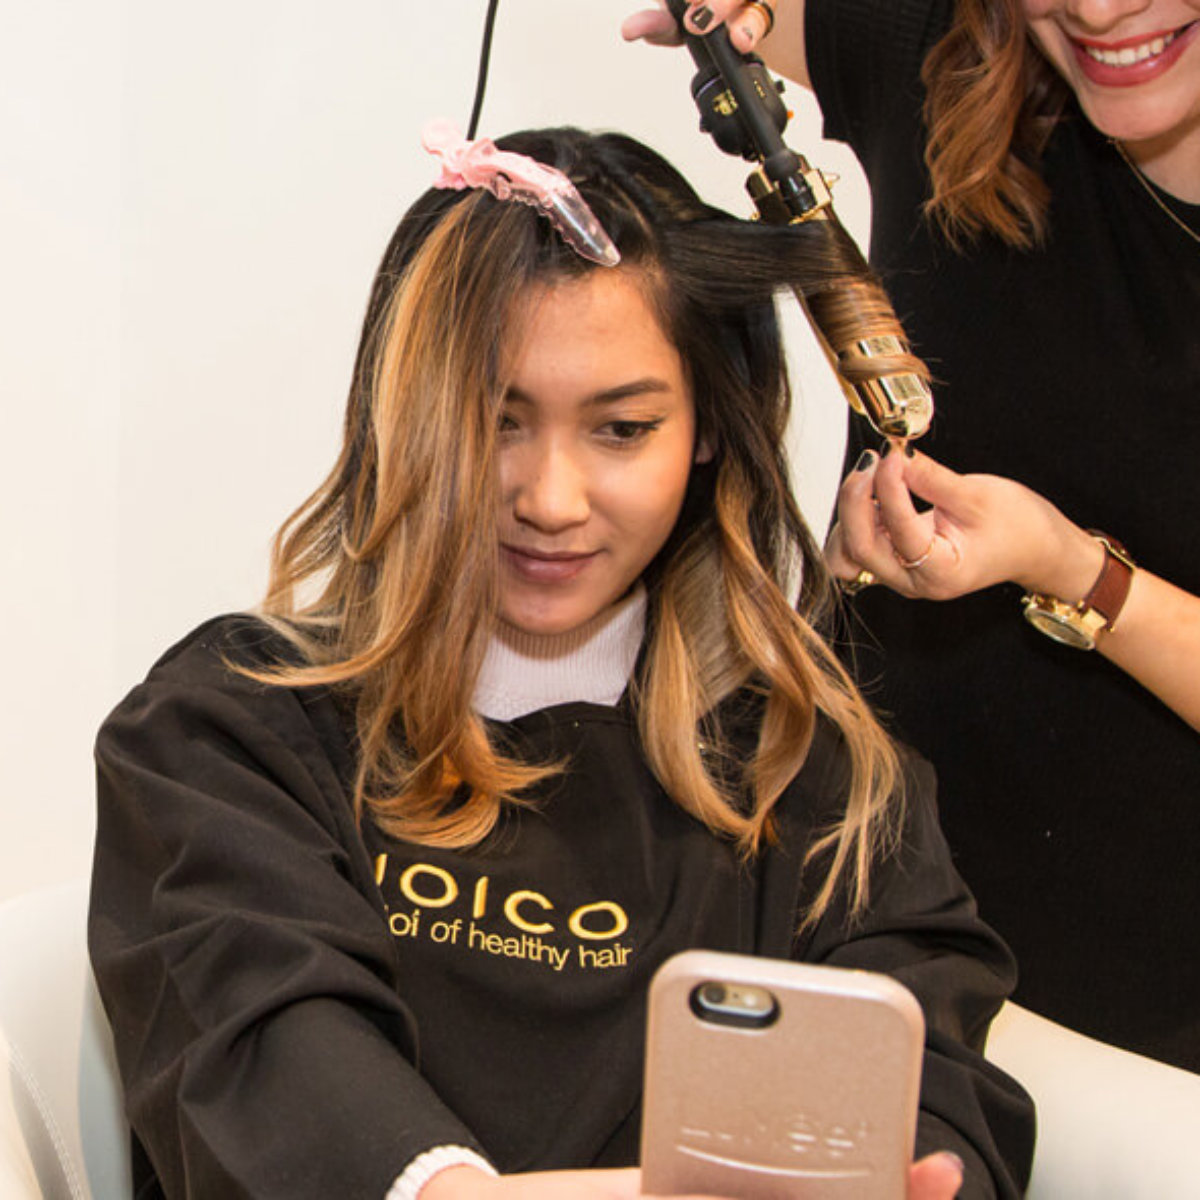 Womens hair being curled by a hairstylist